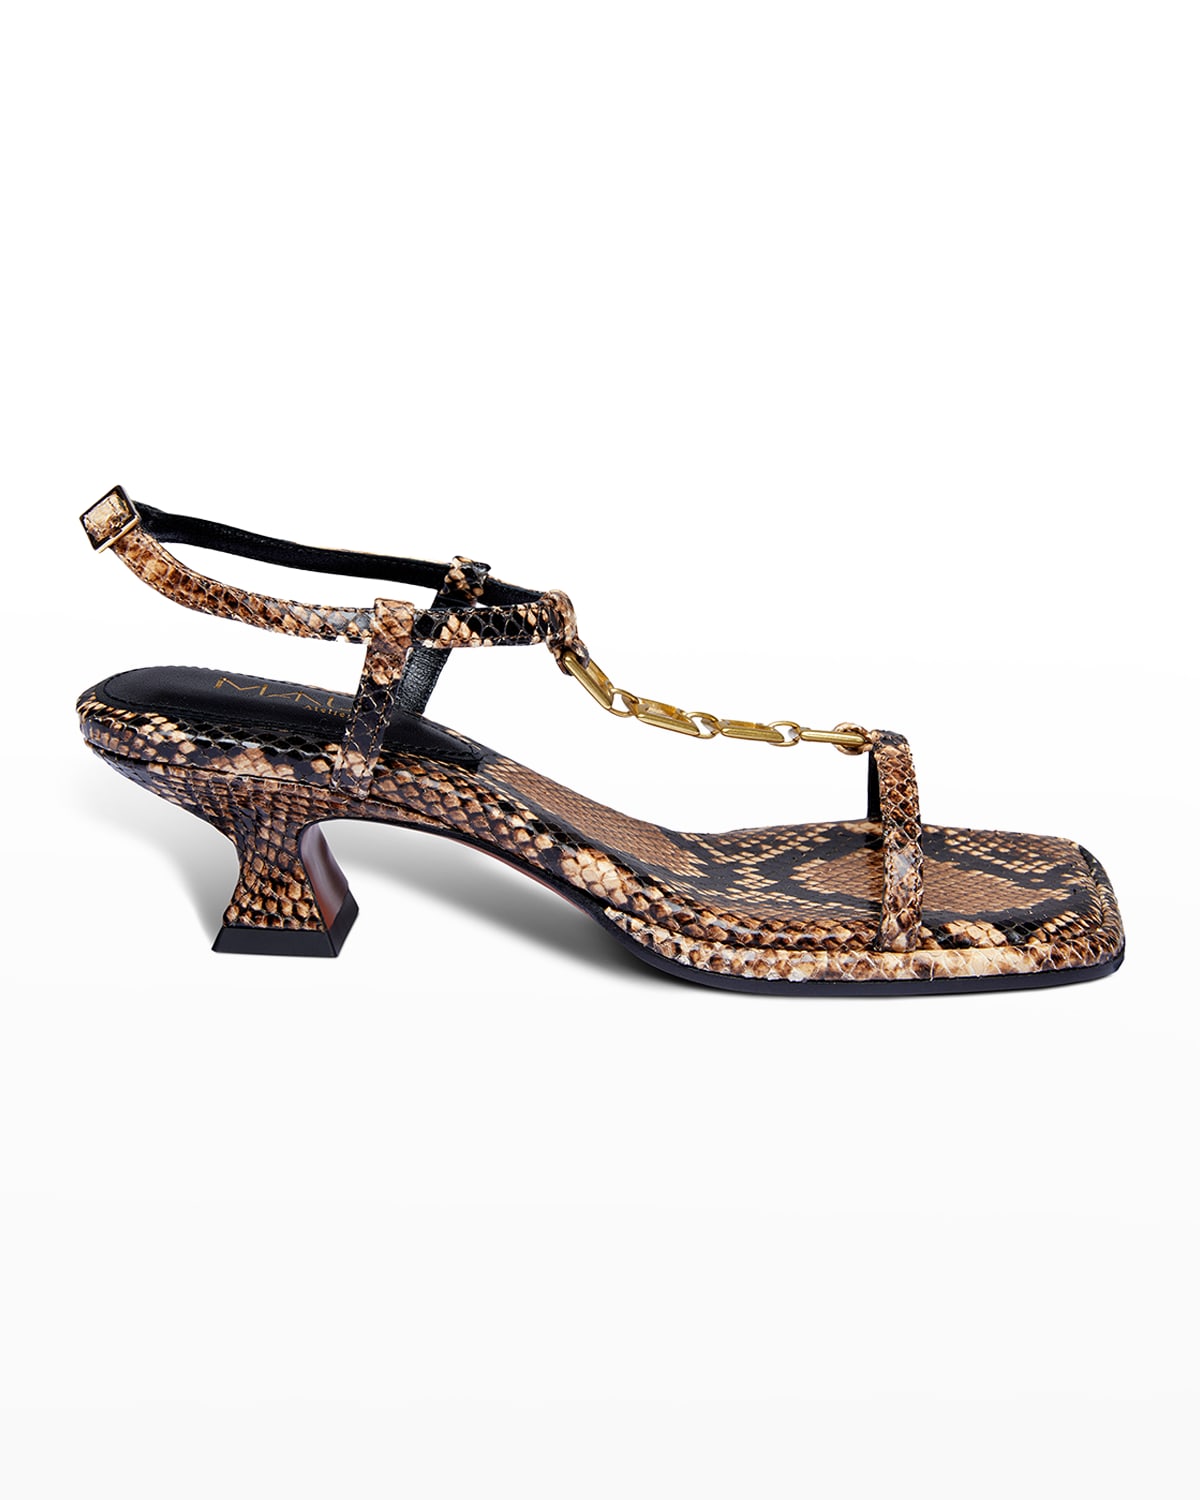 MANU ATELIER Butterfly Snake-Embossed T-strap Sandals